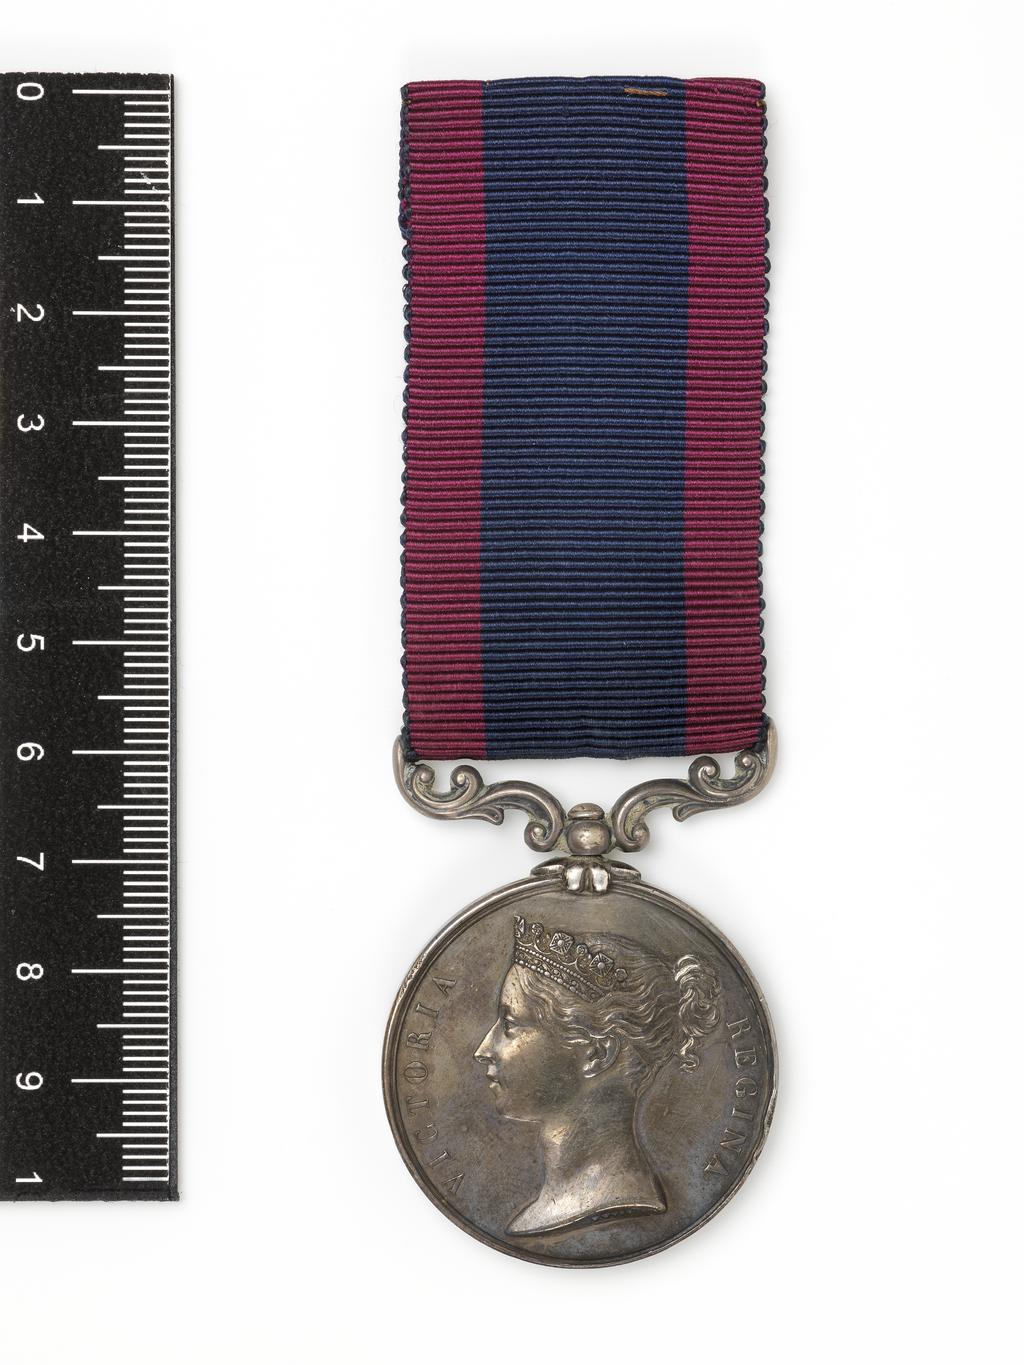 An image of Medal. Sutlej Campaign Medal (Ferozeshuhur). Victoria (1837-1901), ruler; Queen of Great Britain 1837-1901. Obverse; VICTORIA REGINA; Bust of Victoria facing left. Reverse; Victory standing facing left holding wreath with war spoils at feet; exergue bears inscription "FEROZESHUHUR". Wyon, William, artist (British). London mint. Silver, struck, weight 36.34 g, diameter 36.3 mm, 1846. Notes: This example was awarded to Private Francis Greenway of the 29th Regiment, who fought in an inconclusive but mutually costly attack at Ferozeshah soon after the outbreak of war, on 21 December 1845.